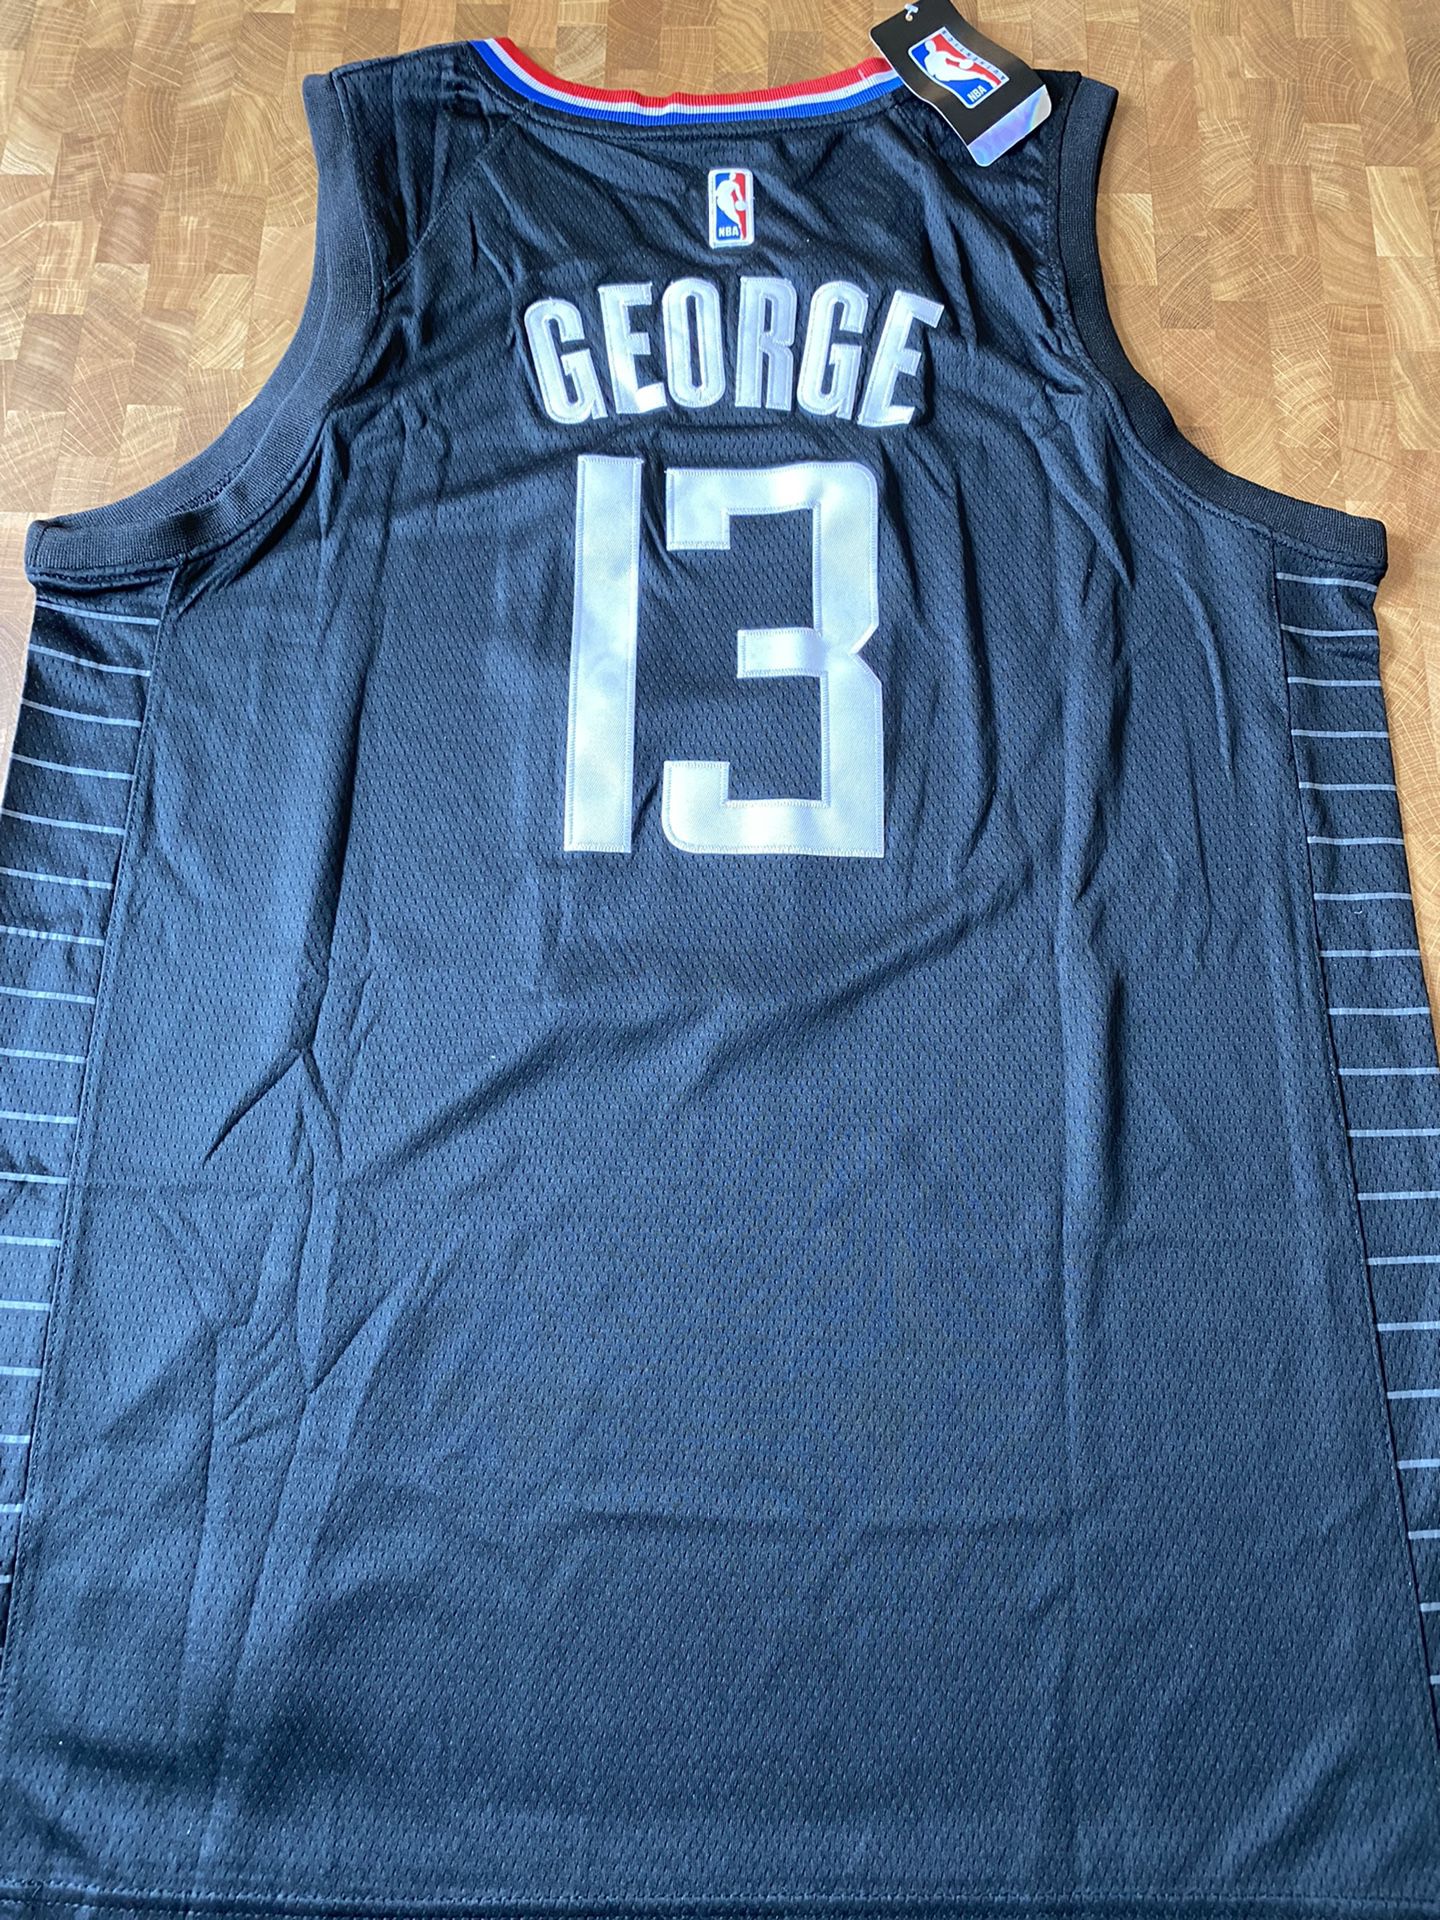 Fresno State Paul George Jersey (good condition) for Sale in Portland, OR -  OfferUp